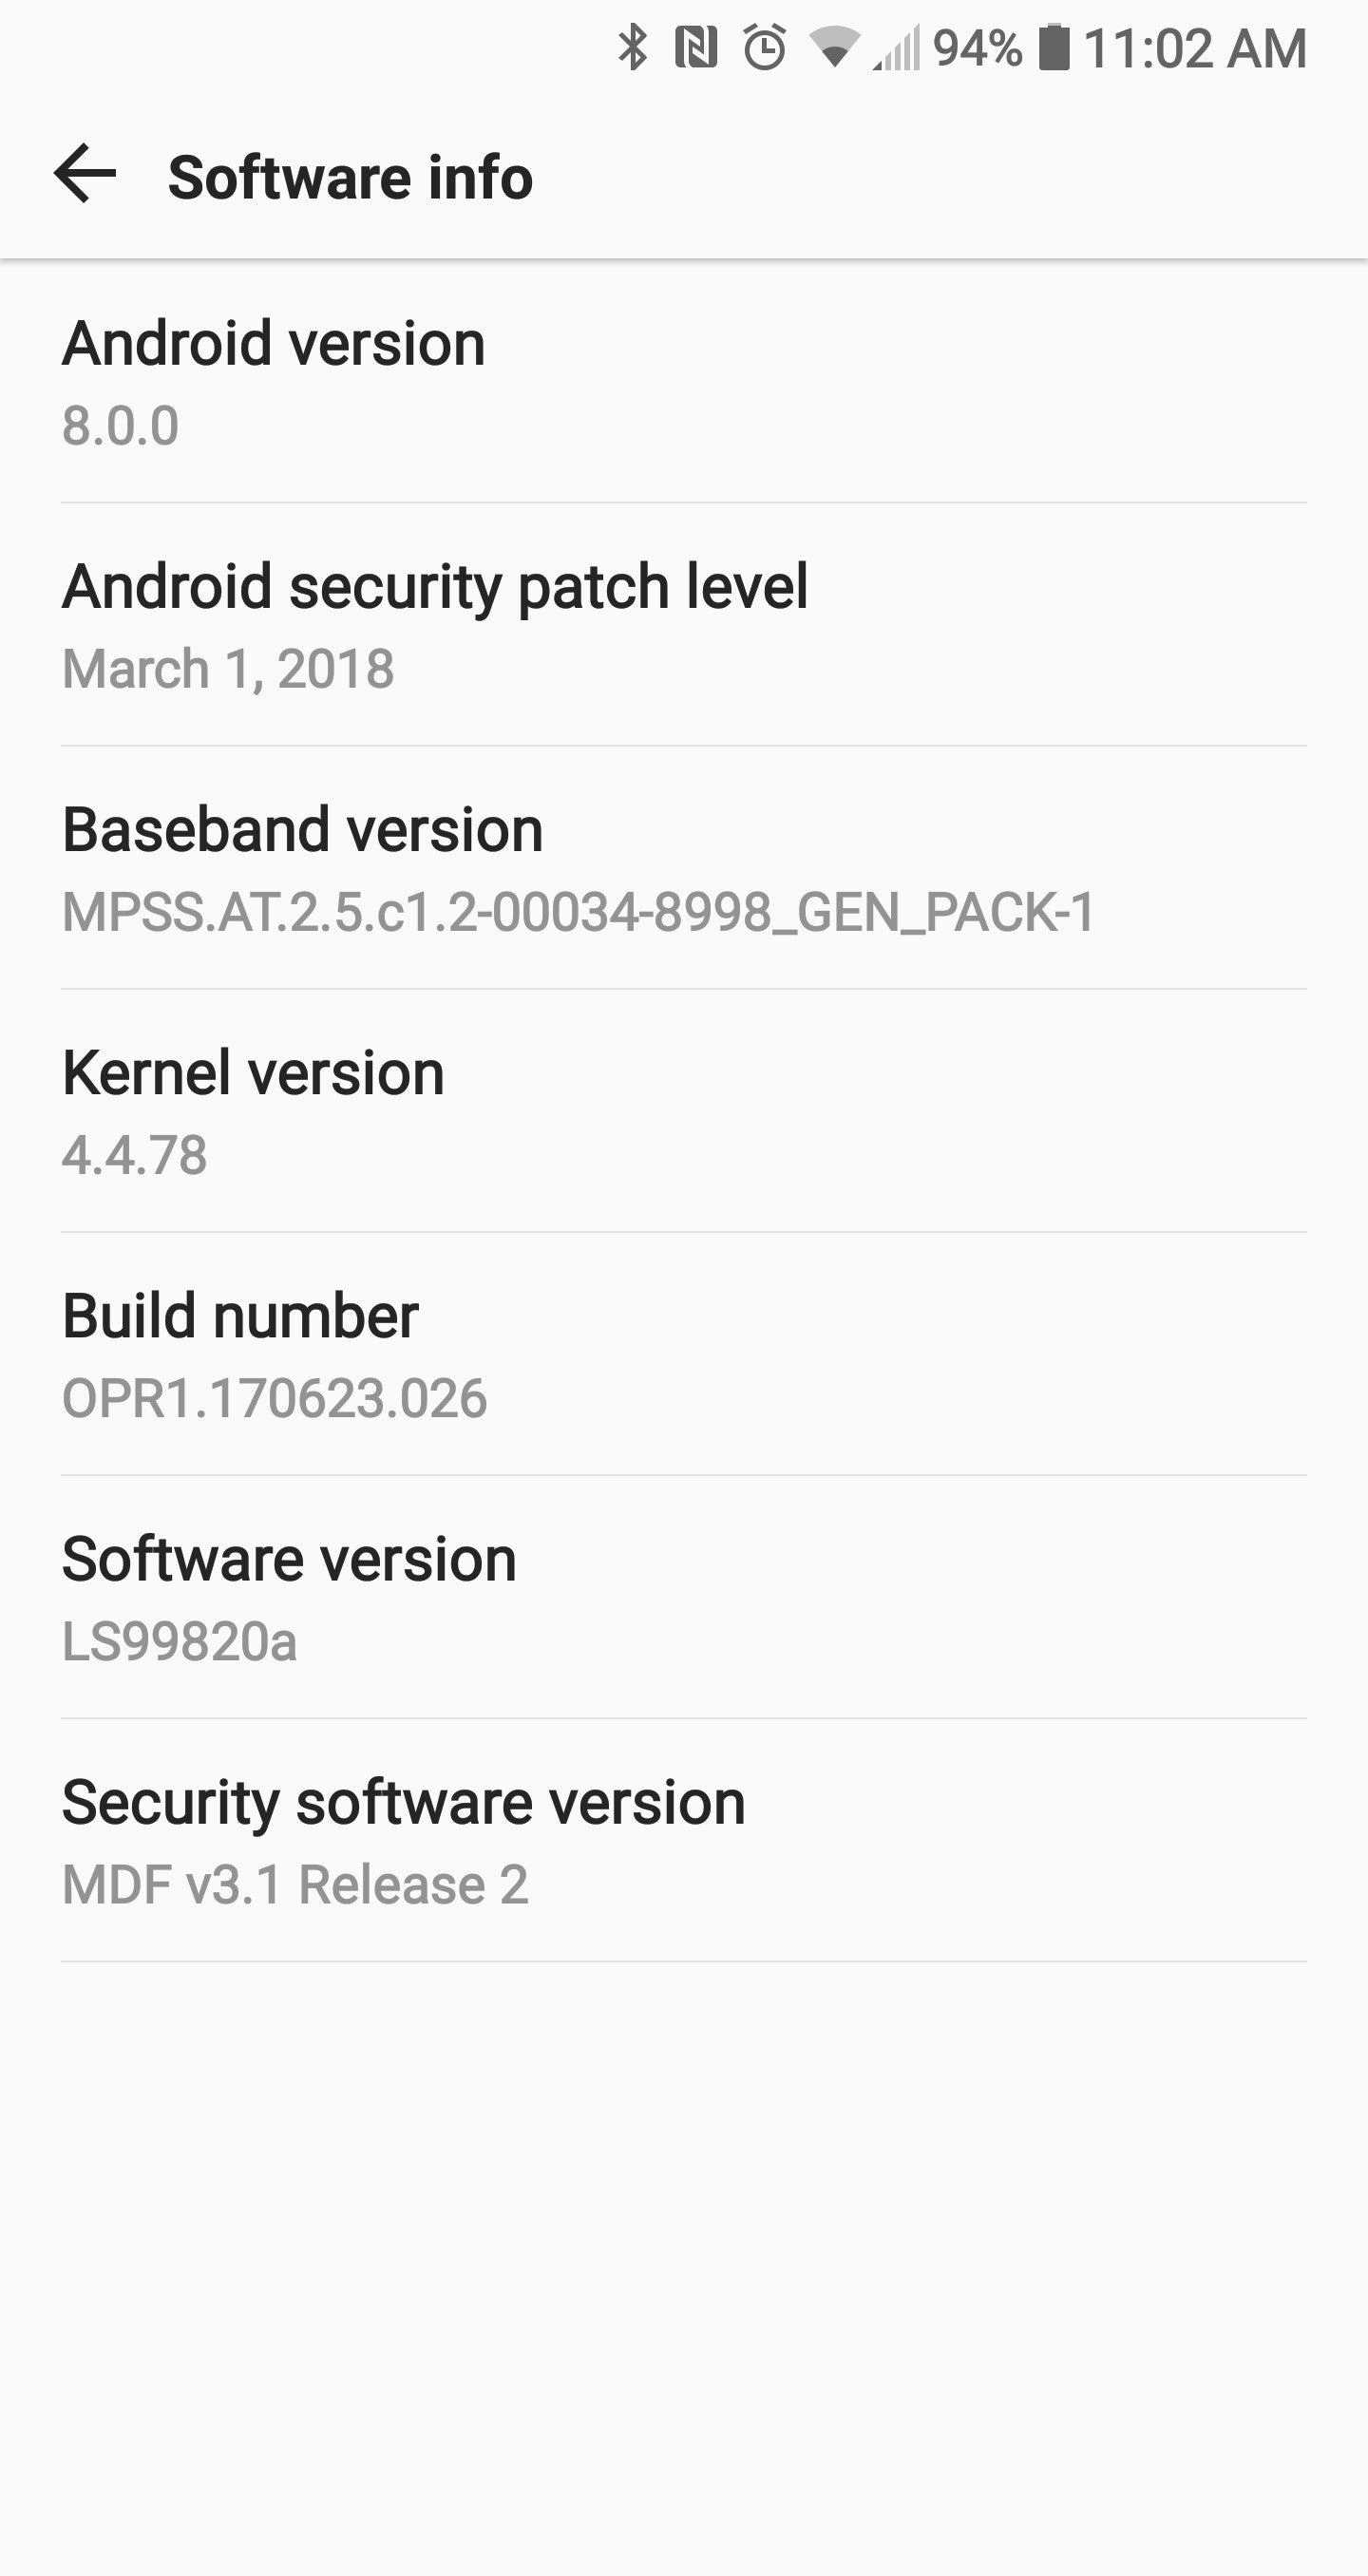 LG V30 is getting Android 8.0 Oreo with March security patch at Sprint